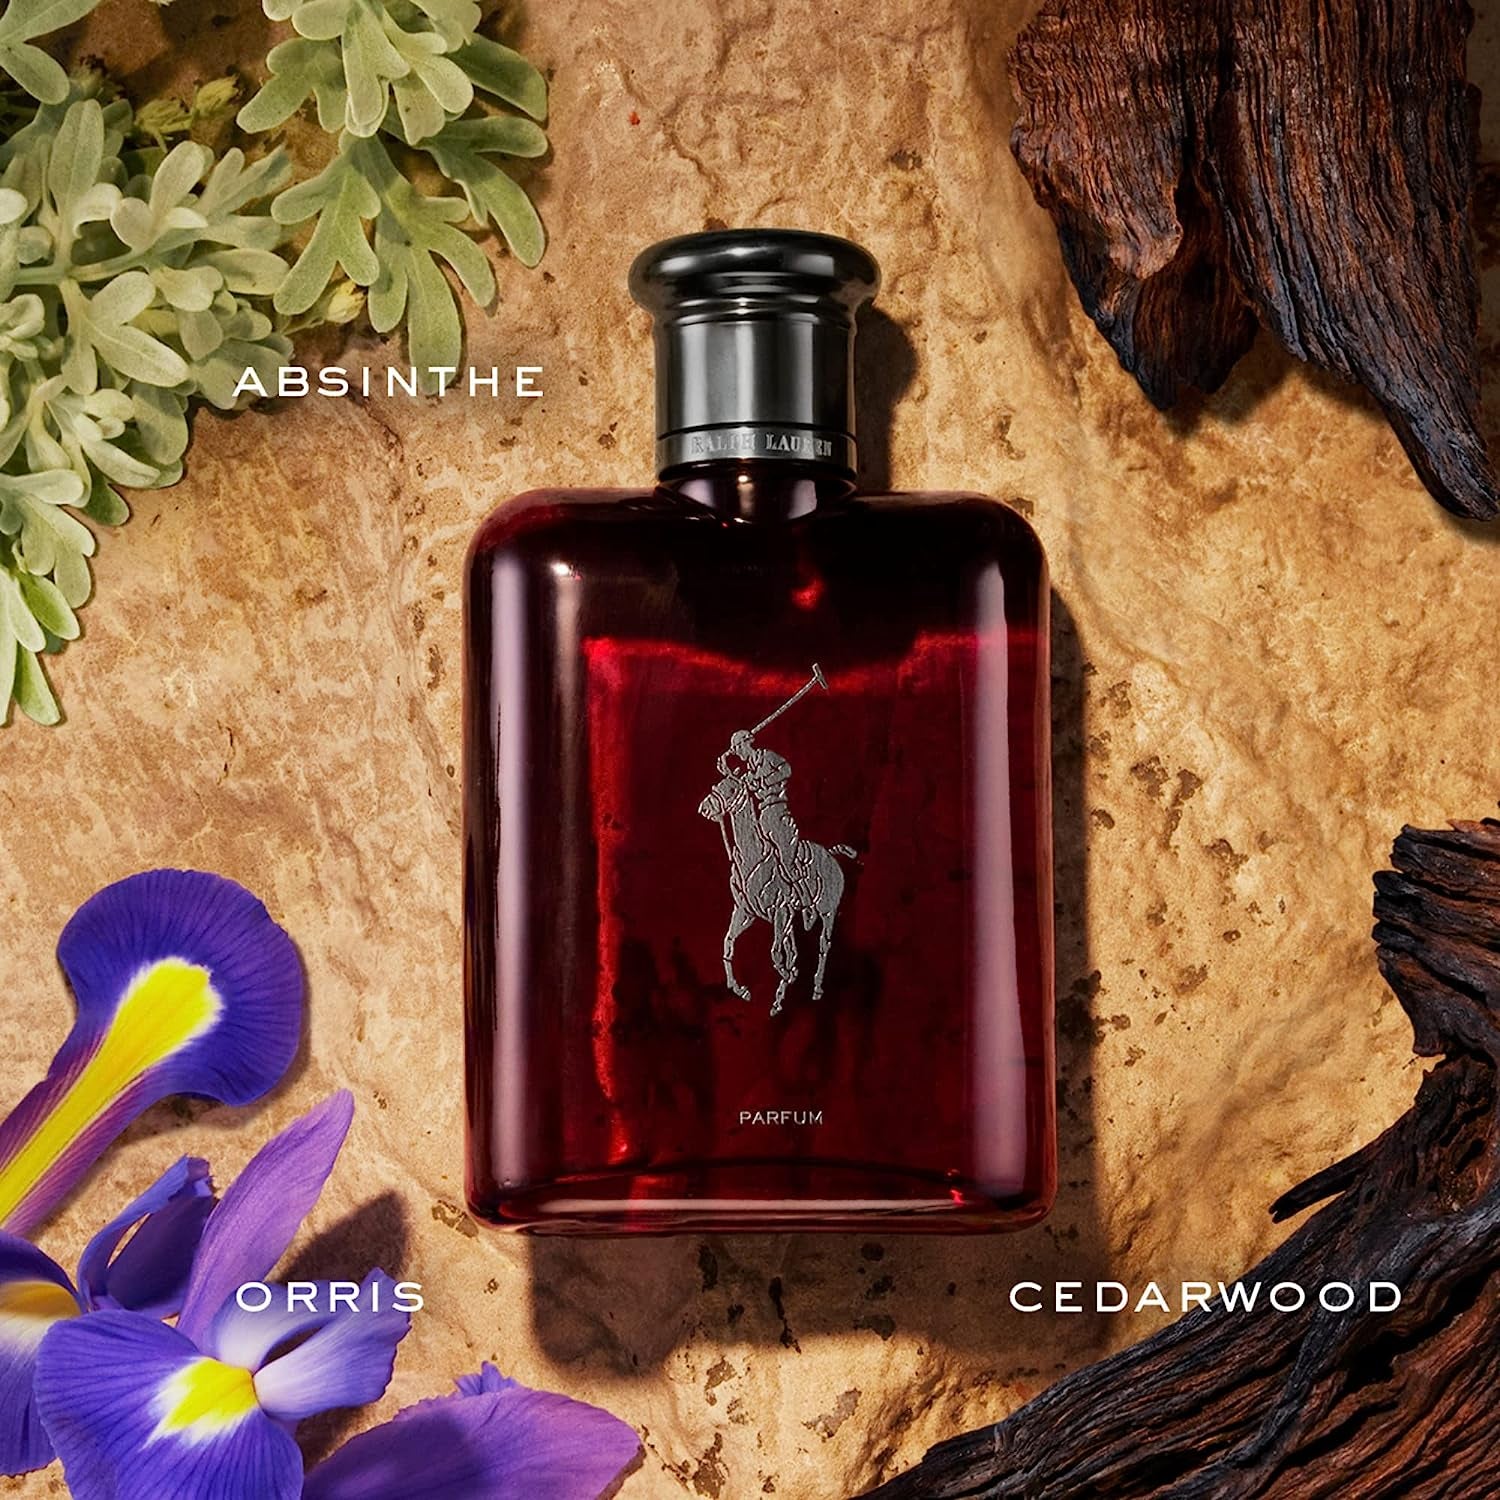 Ralph Lauren - Polo Red - Parfum - Men's Cologne - Ambery & Woody - With Absinthe, Cedarwood, and Musk - Intense Fragrance